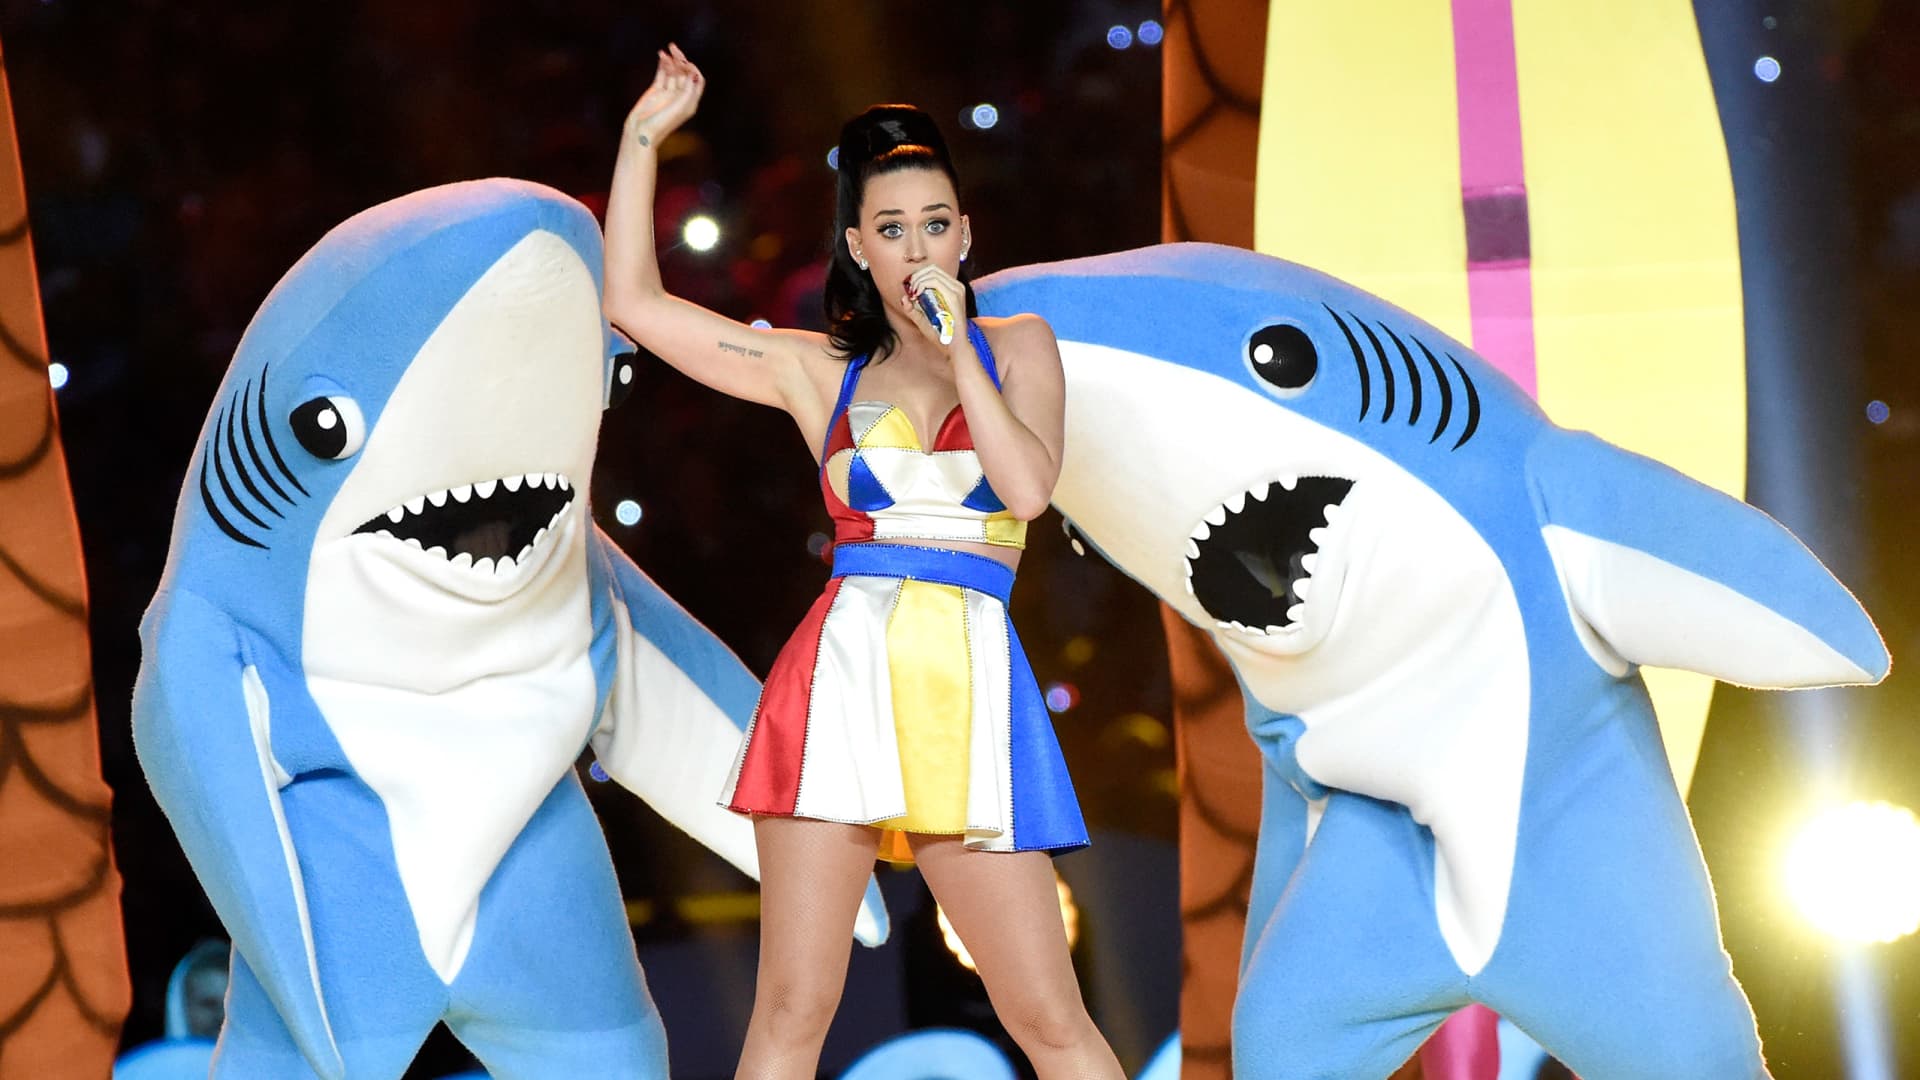 Recording artist Katy Perry performs onstage during the Pepsi Super Bowl XLIX Halftime Show at University of Phoenix Stadium on February 1, 2015 in Glendale, Arizona.(Photo by Kevin Mazur/WireImage)